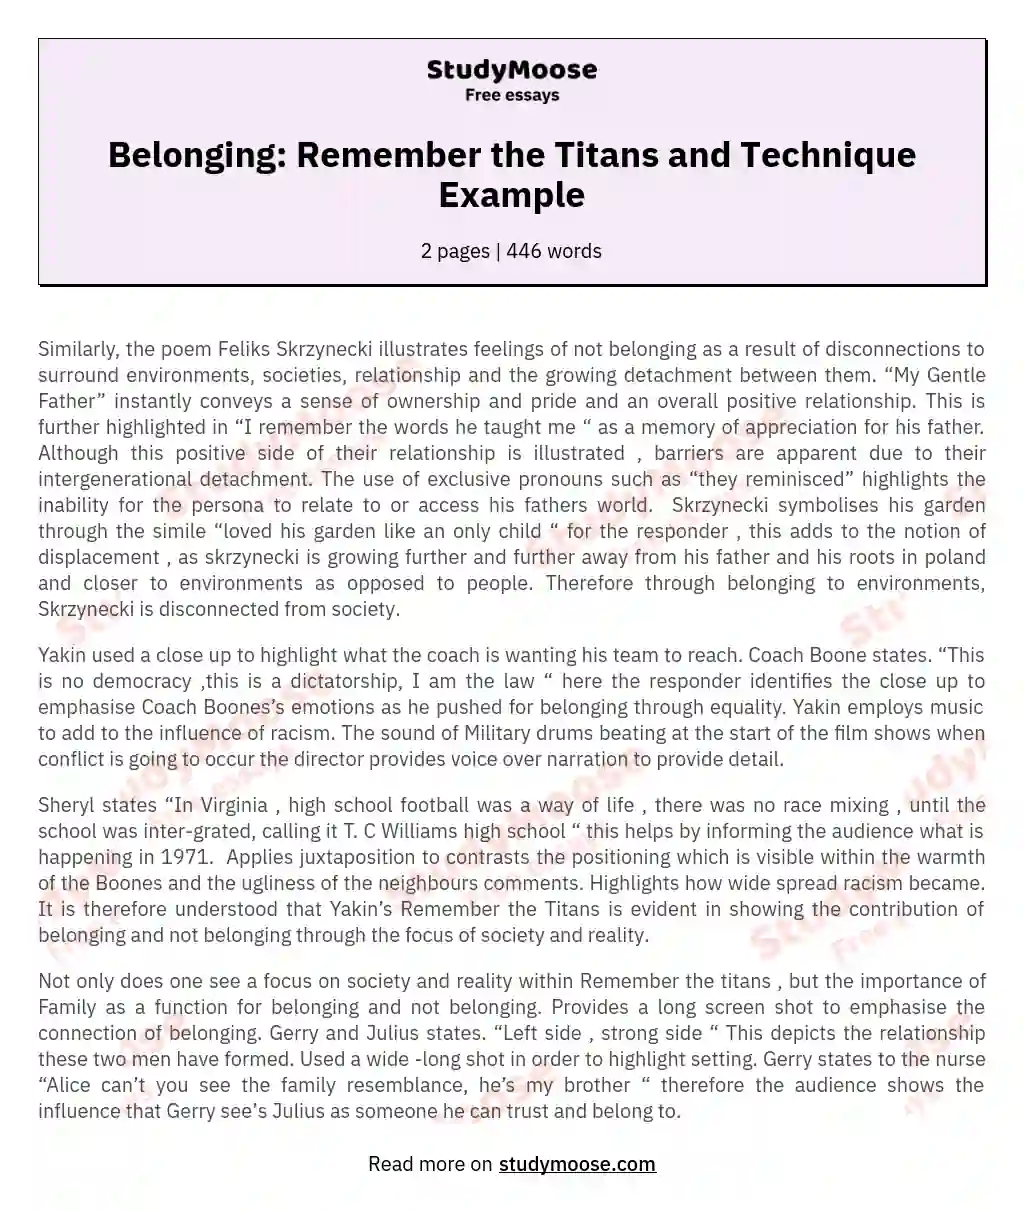 Belonging: Remember the Titans and Technique Example essay